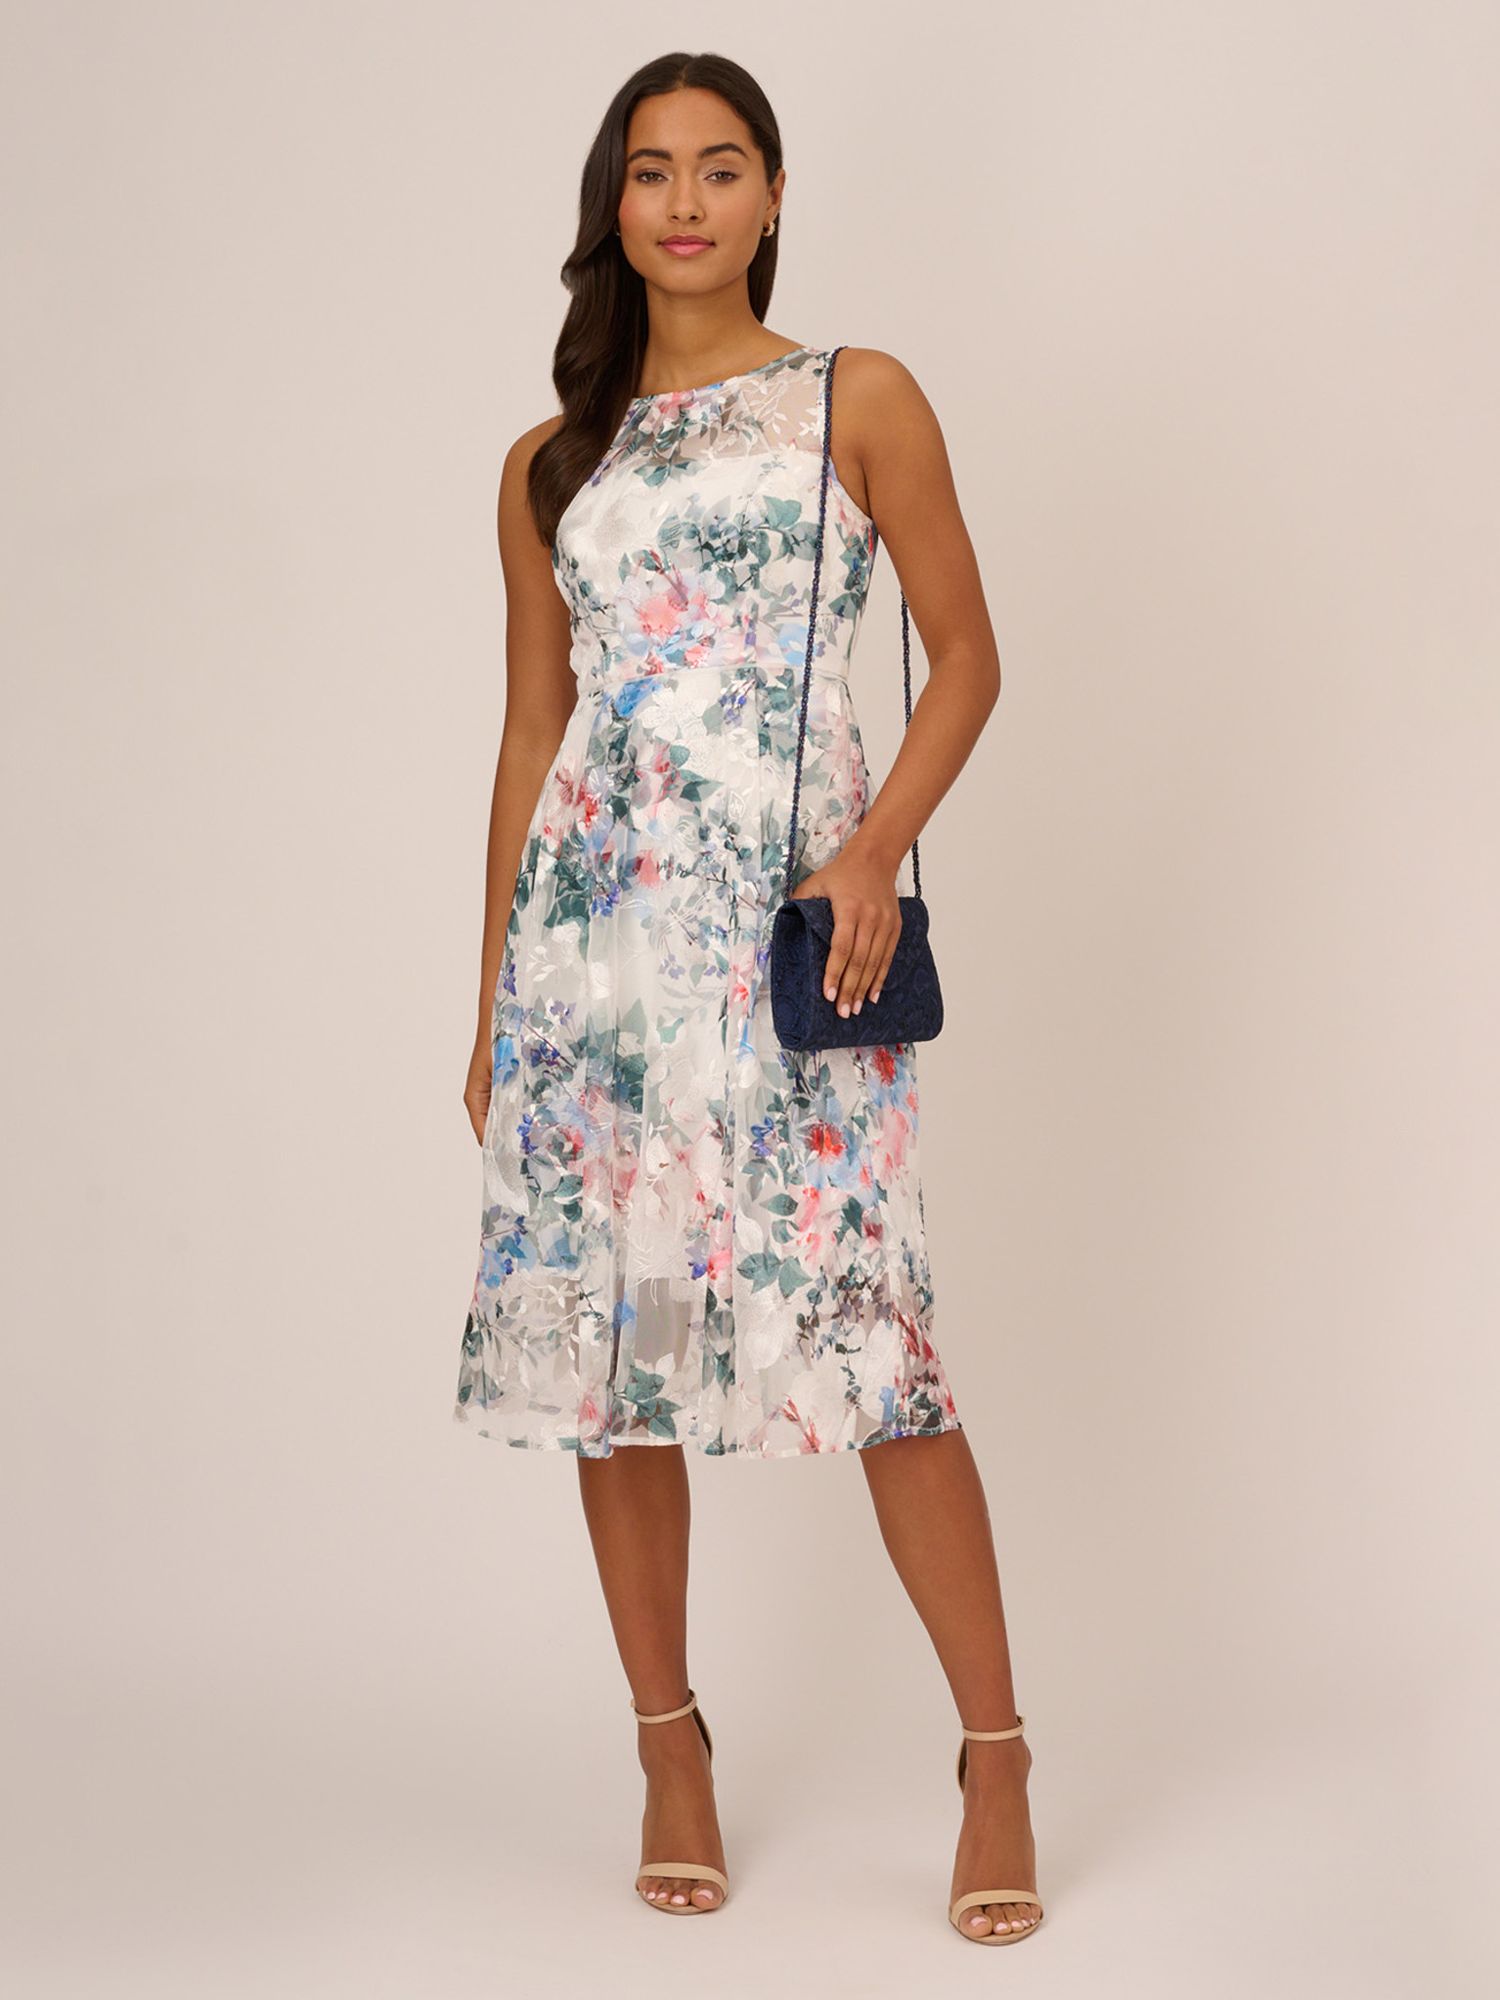 Adrianna Papell Floral Printed Veiled Dress, Ivory/Multi